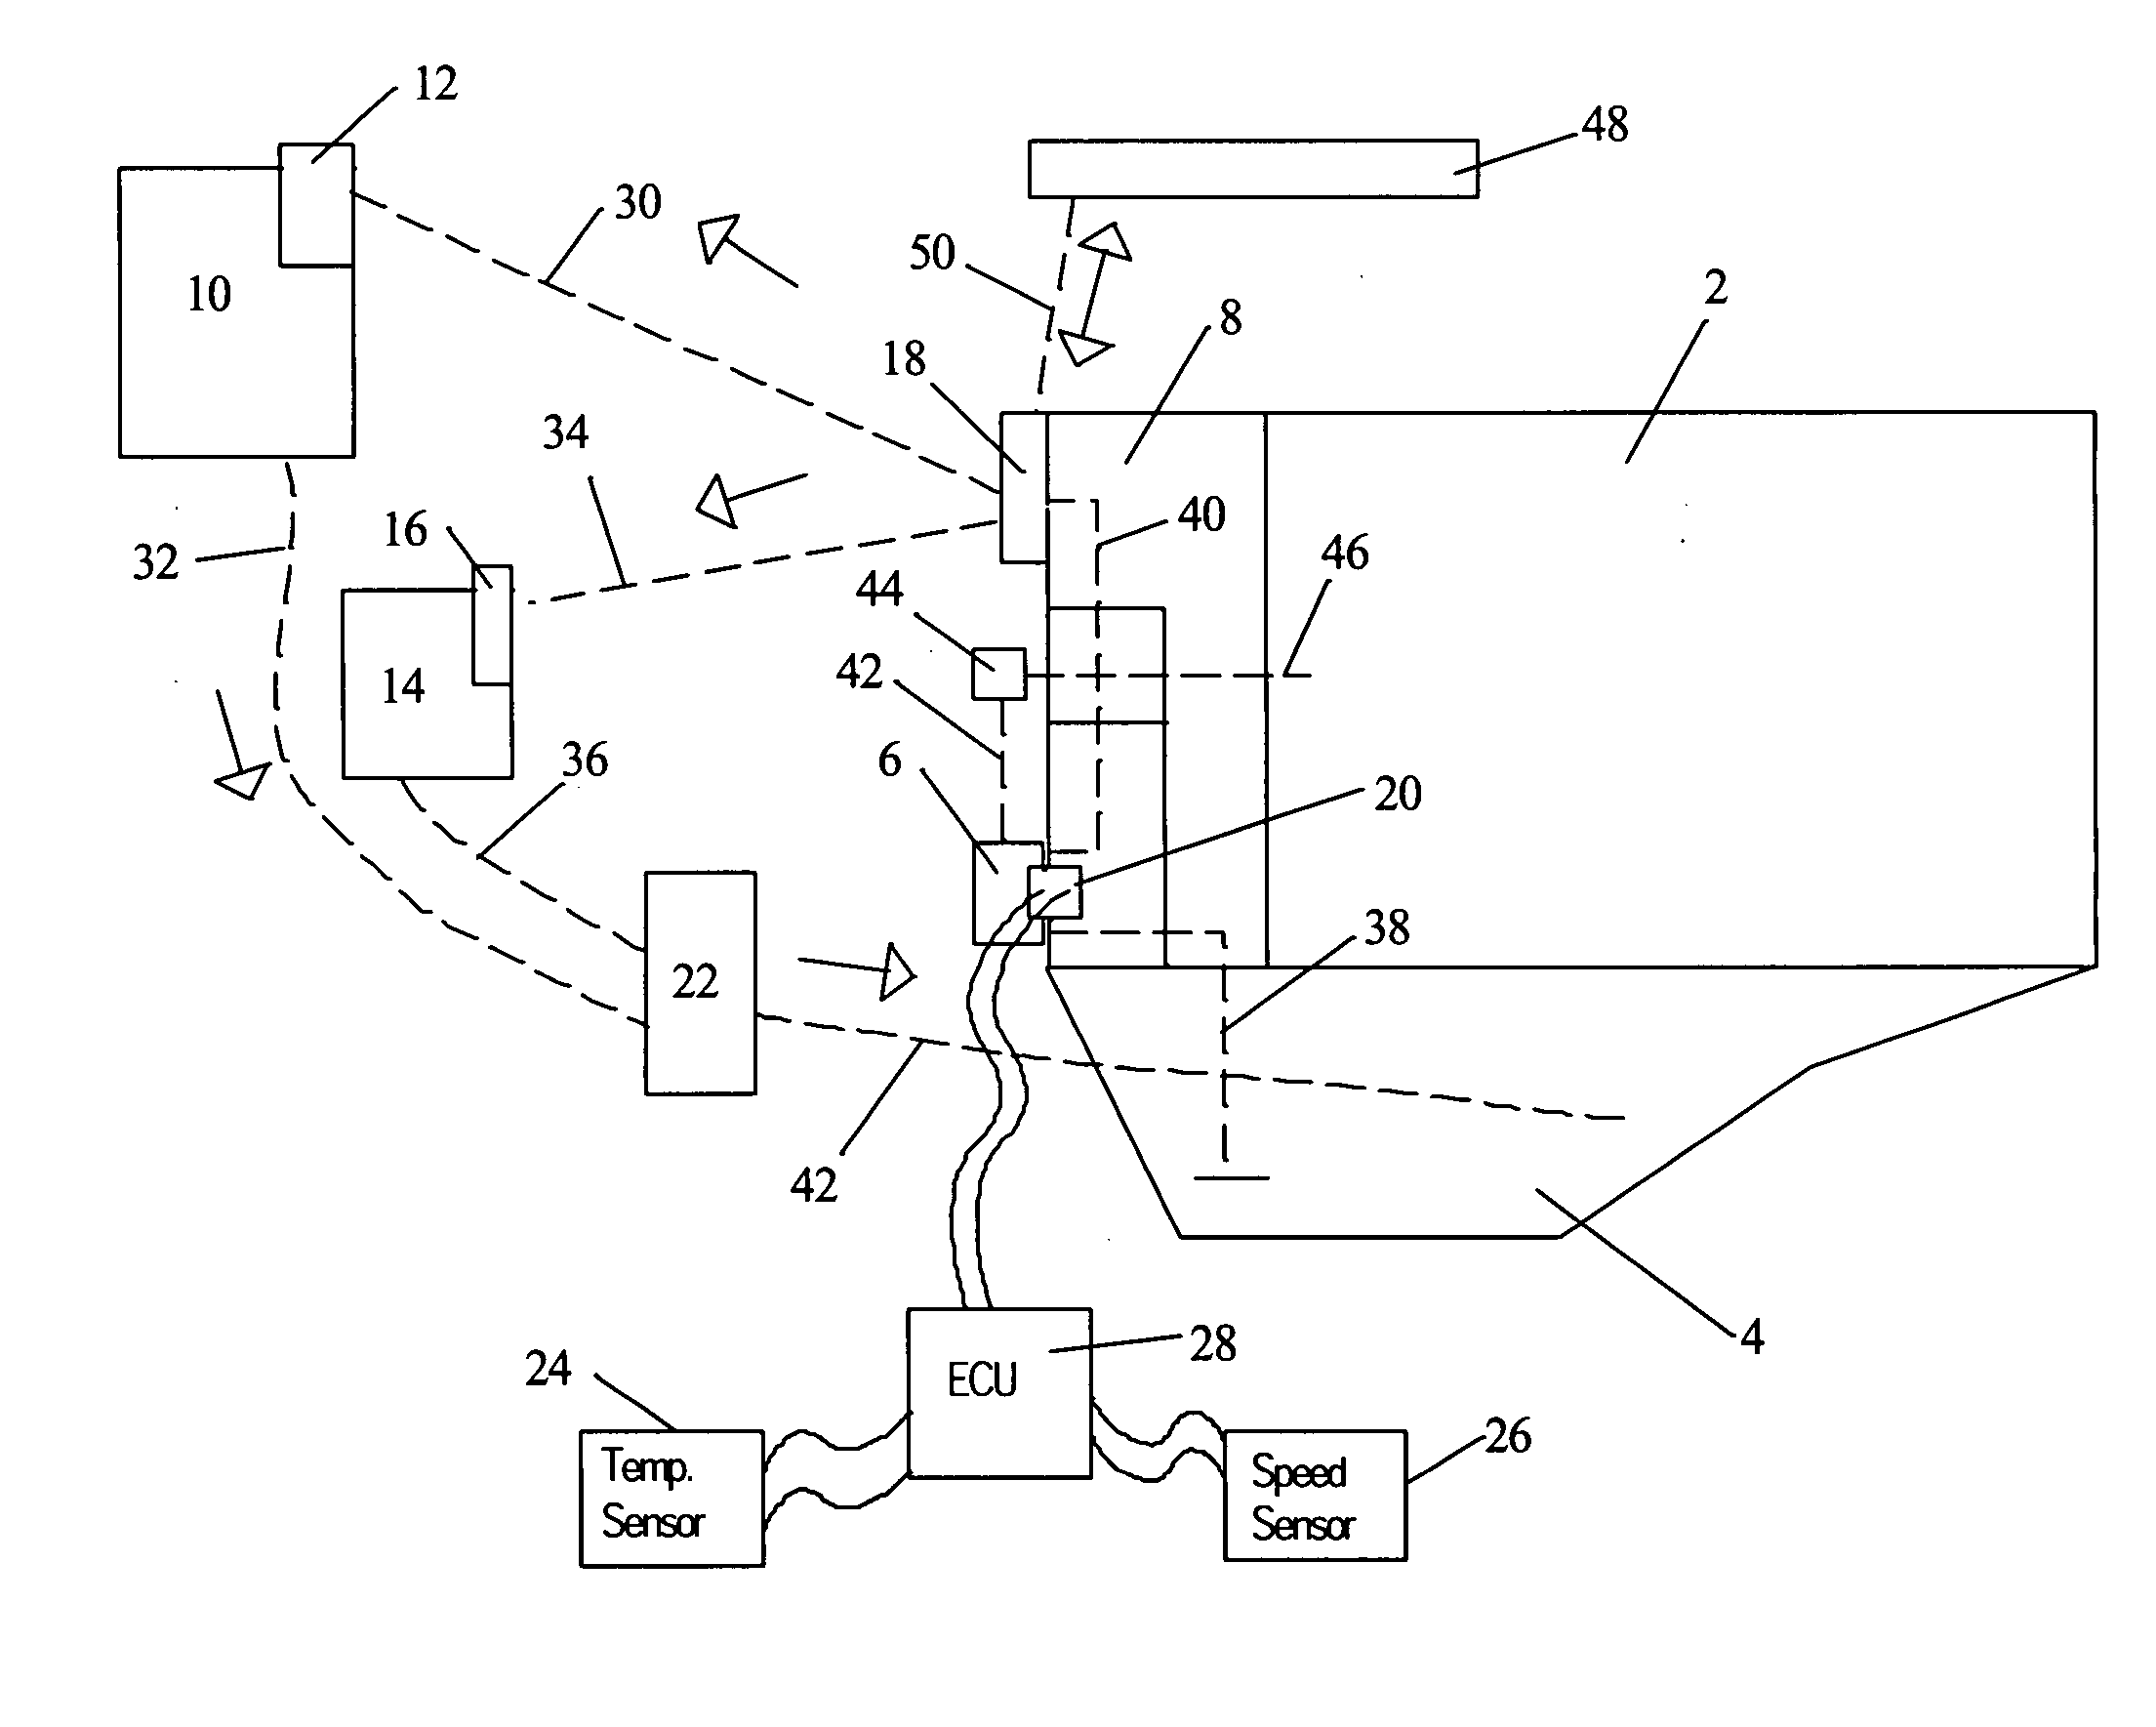 System and method of providing hydraulic pressure for mechanical work from an engine lubricating system